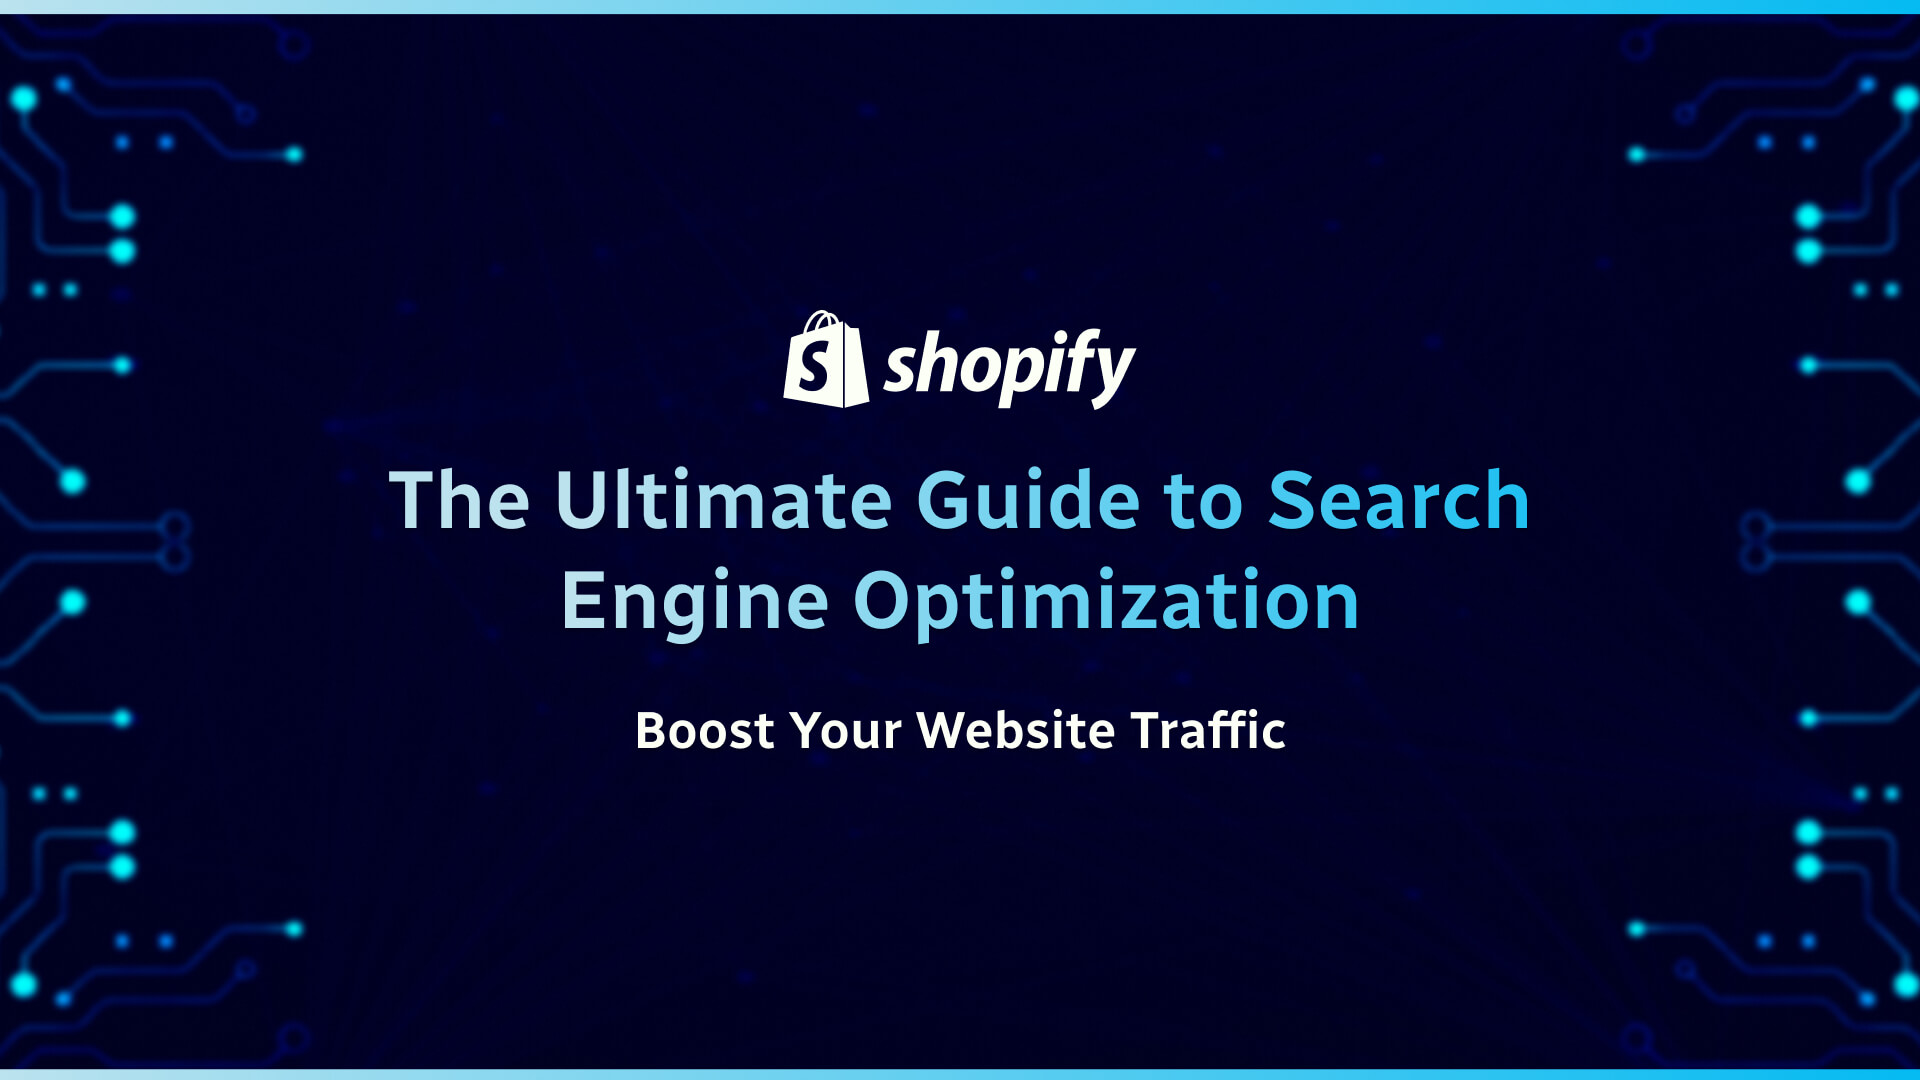 The Ultimate Guide to Search Engine Optimization: Boost Your Website Traffic